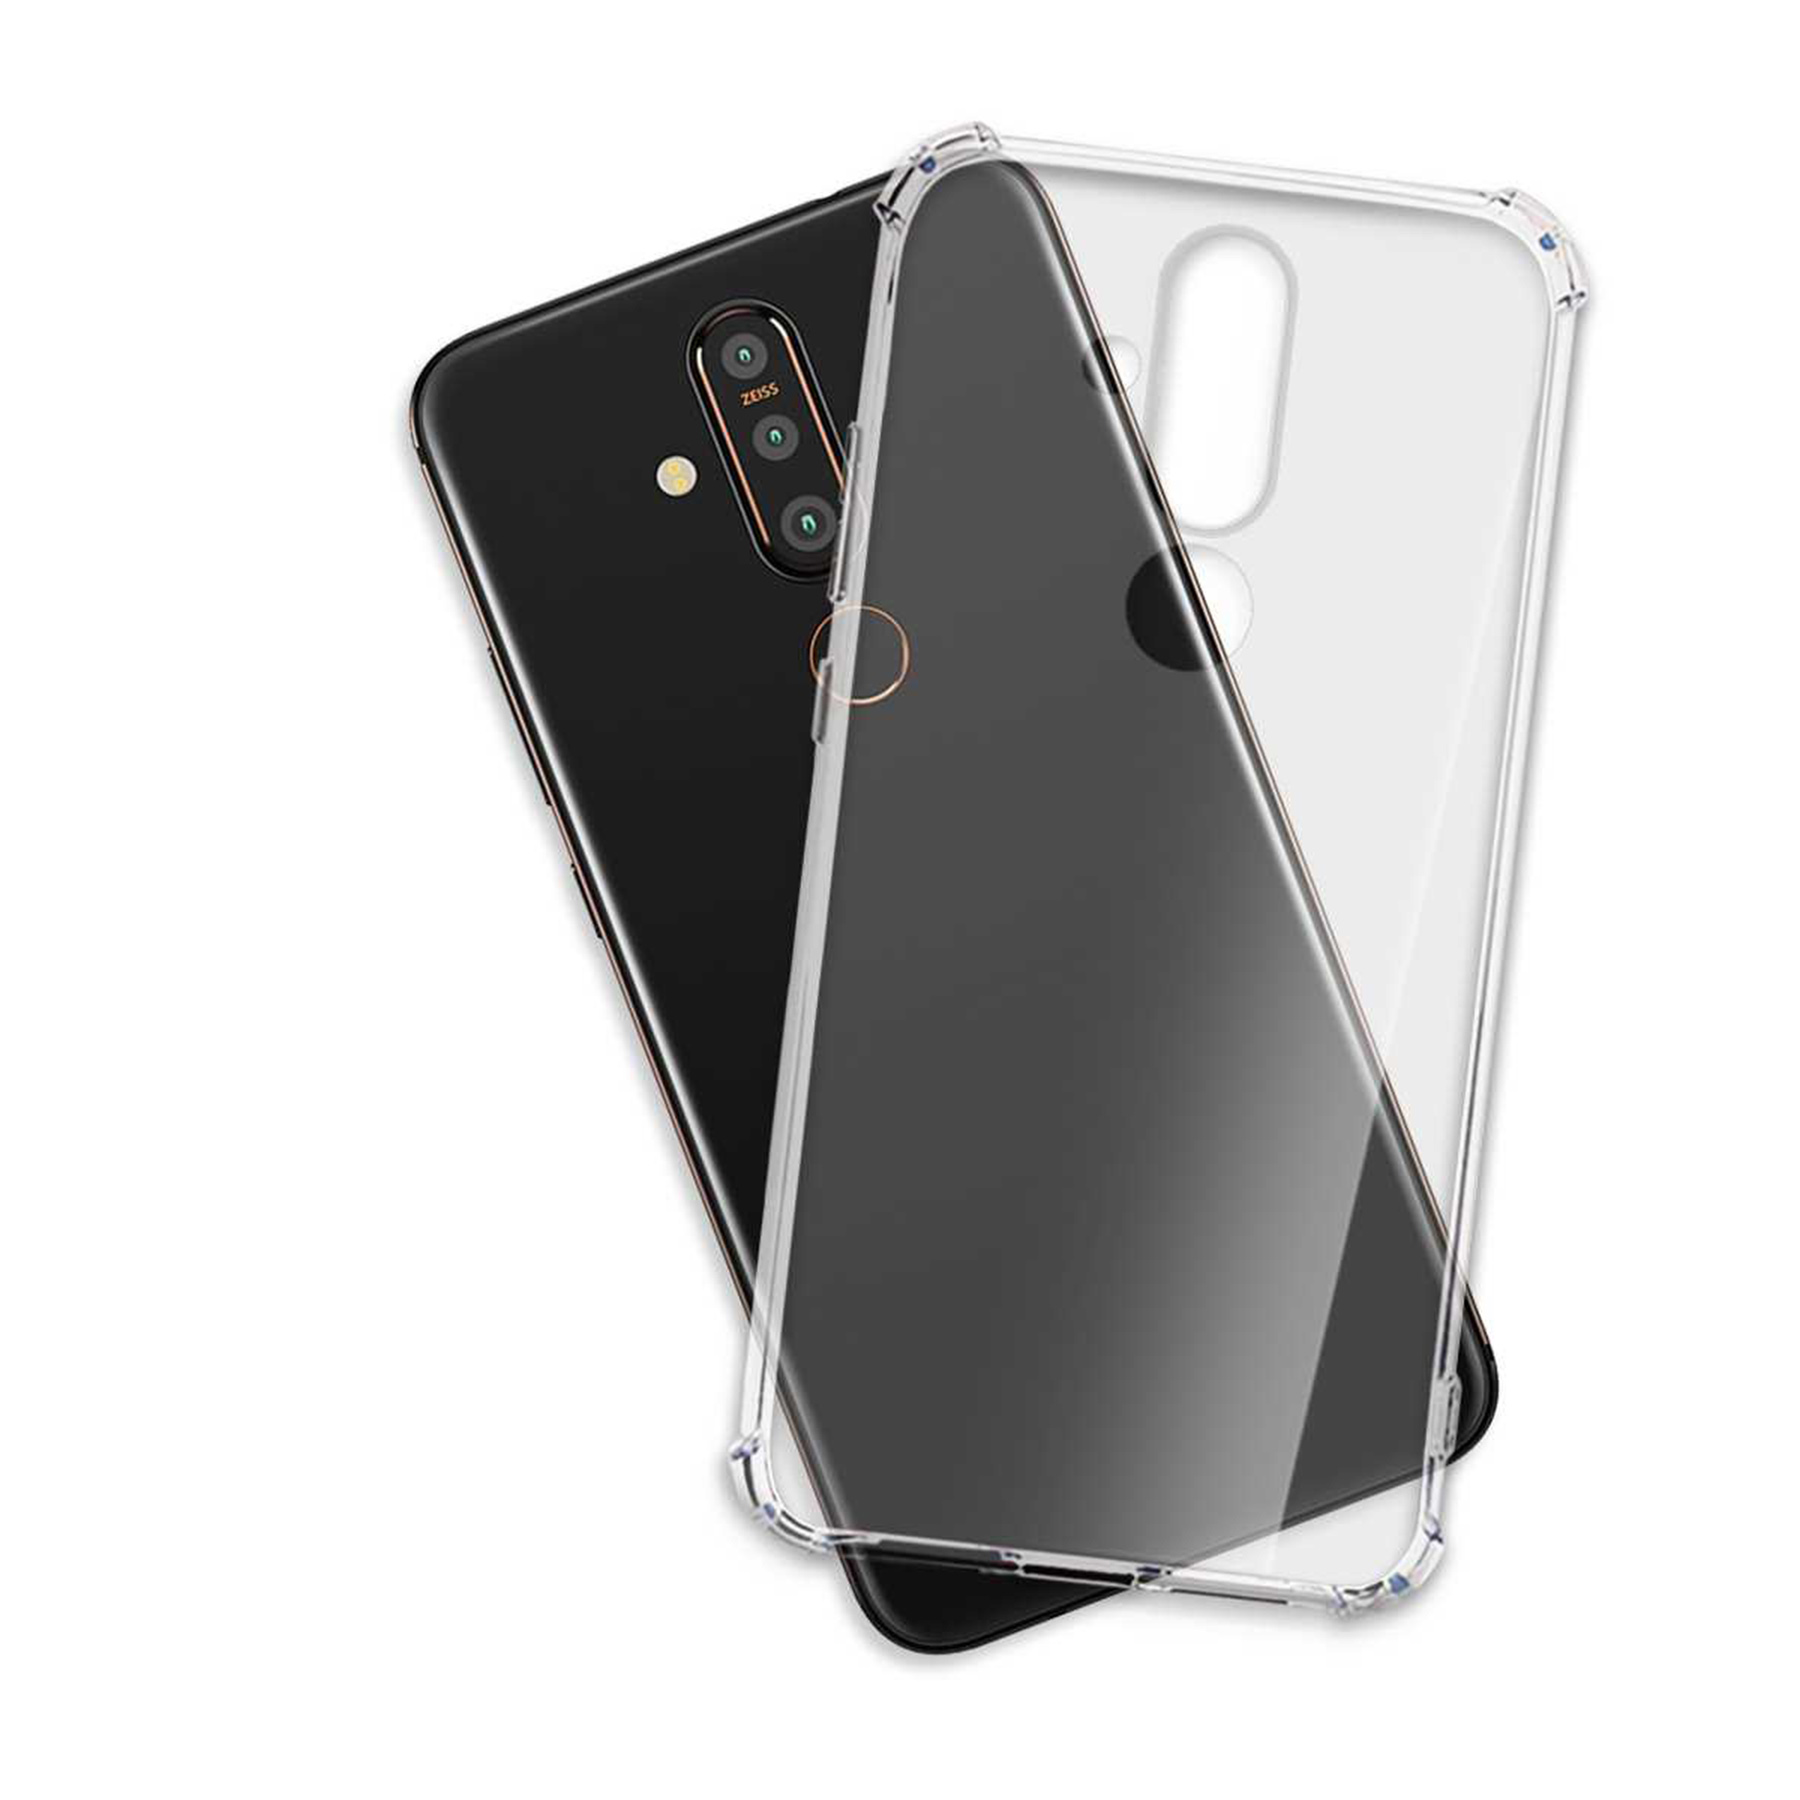 MTB MORE ENERGY Armor Nokia, Transparent 2022-01-08T00:00:00.000+01:00, Backcover, Clear Case